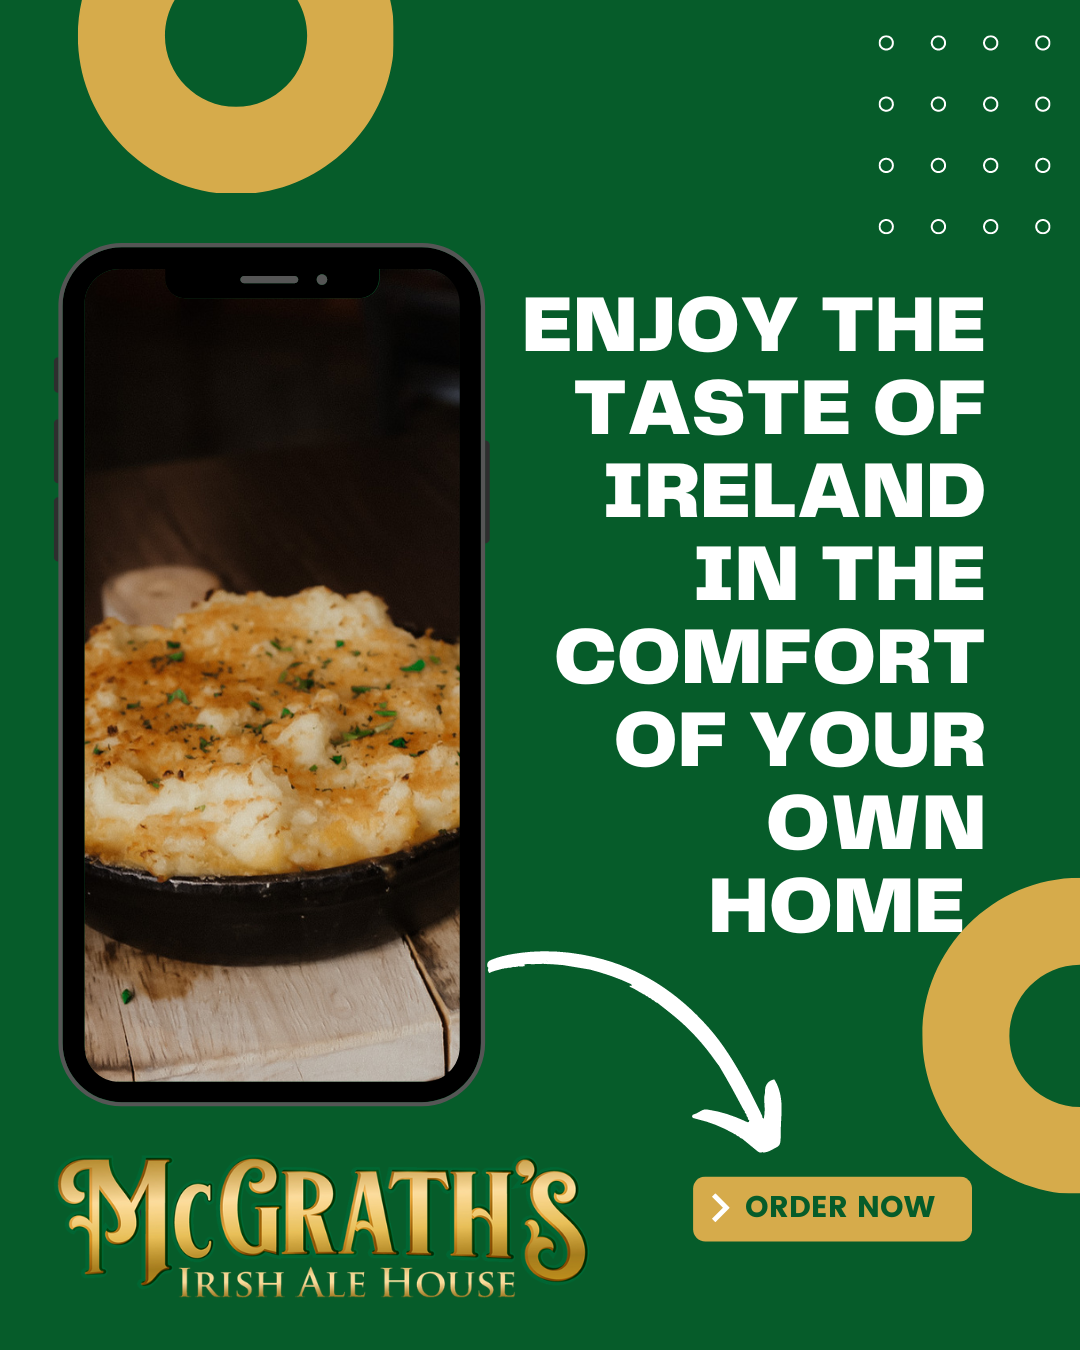 Enjoy the Taste of Ireland in The Comfort of Your Own Home